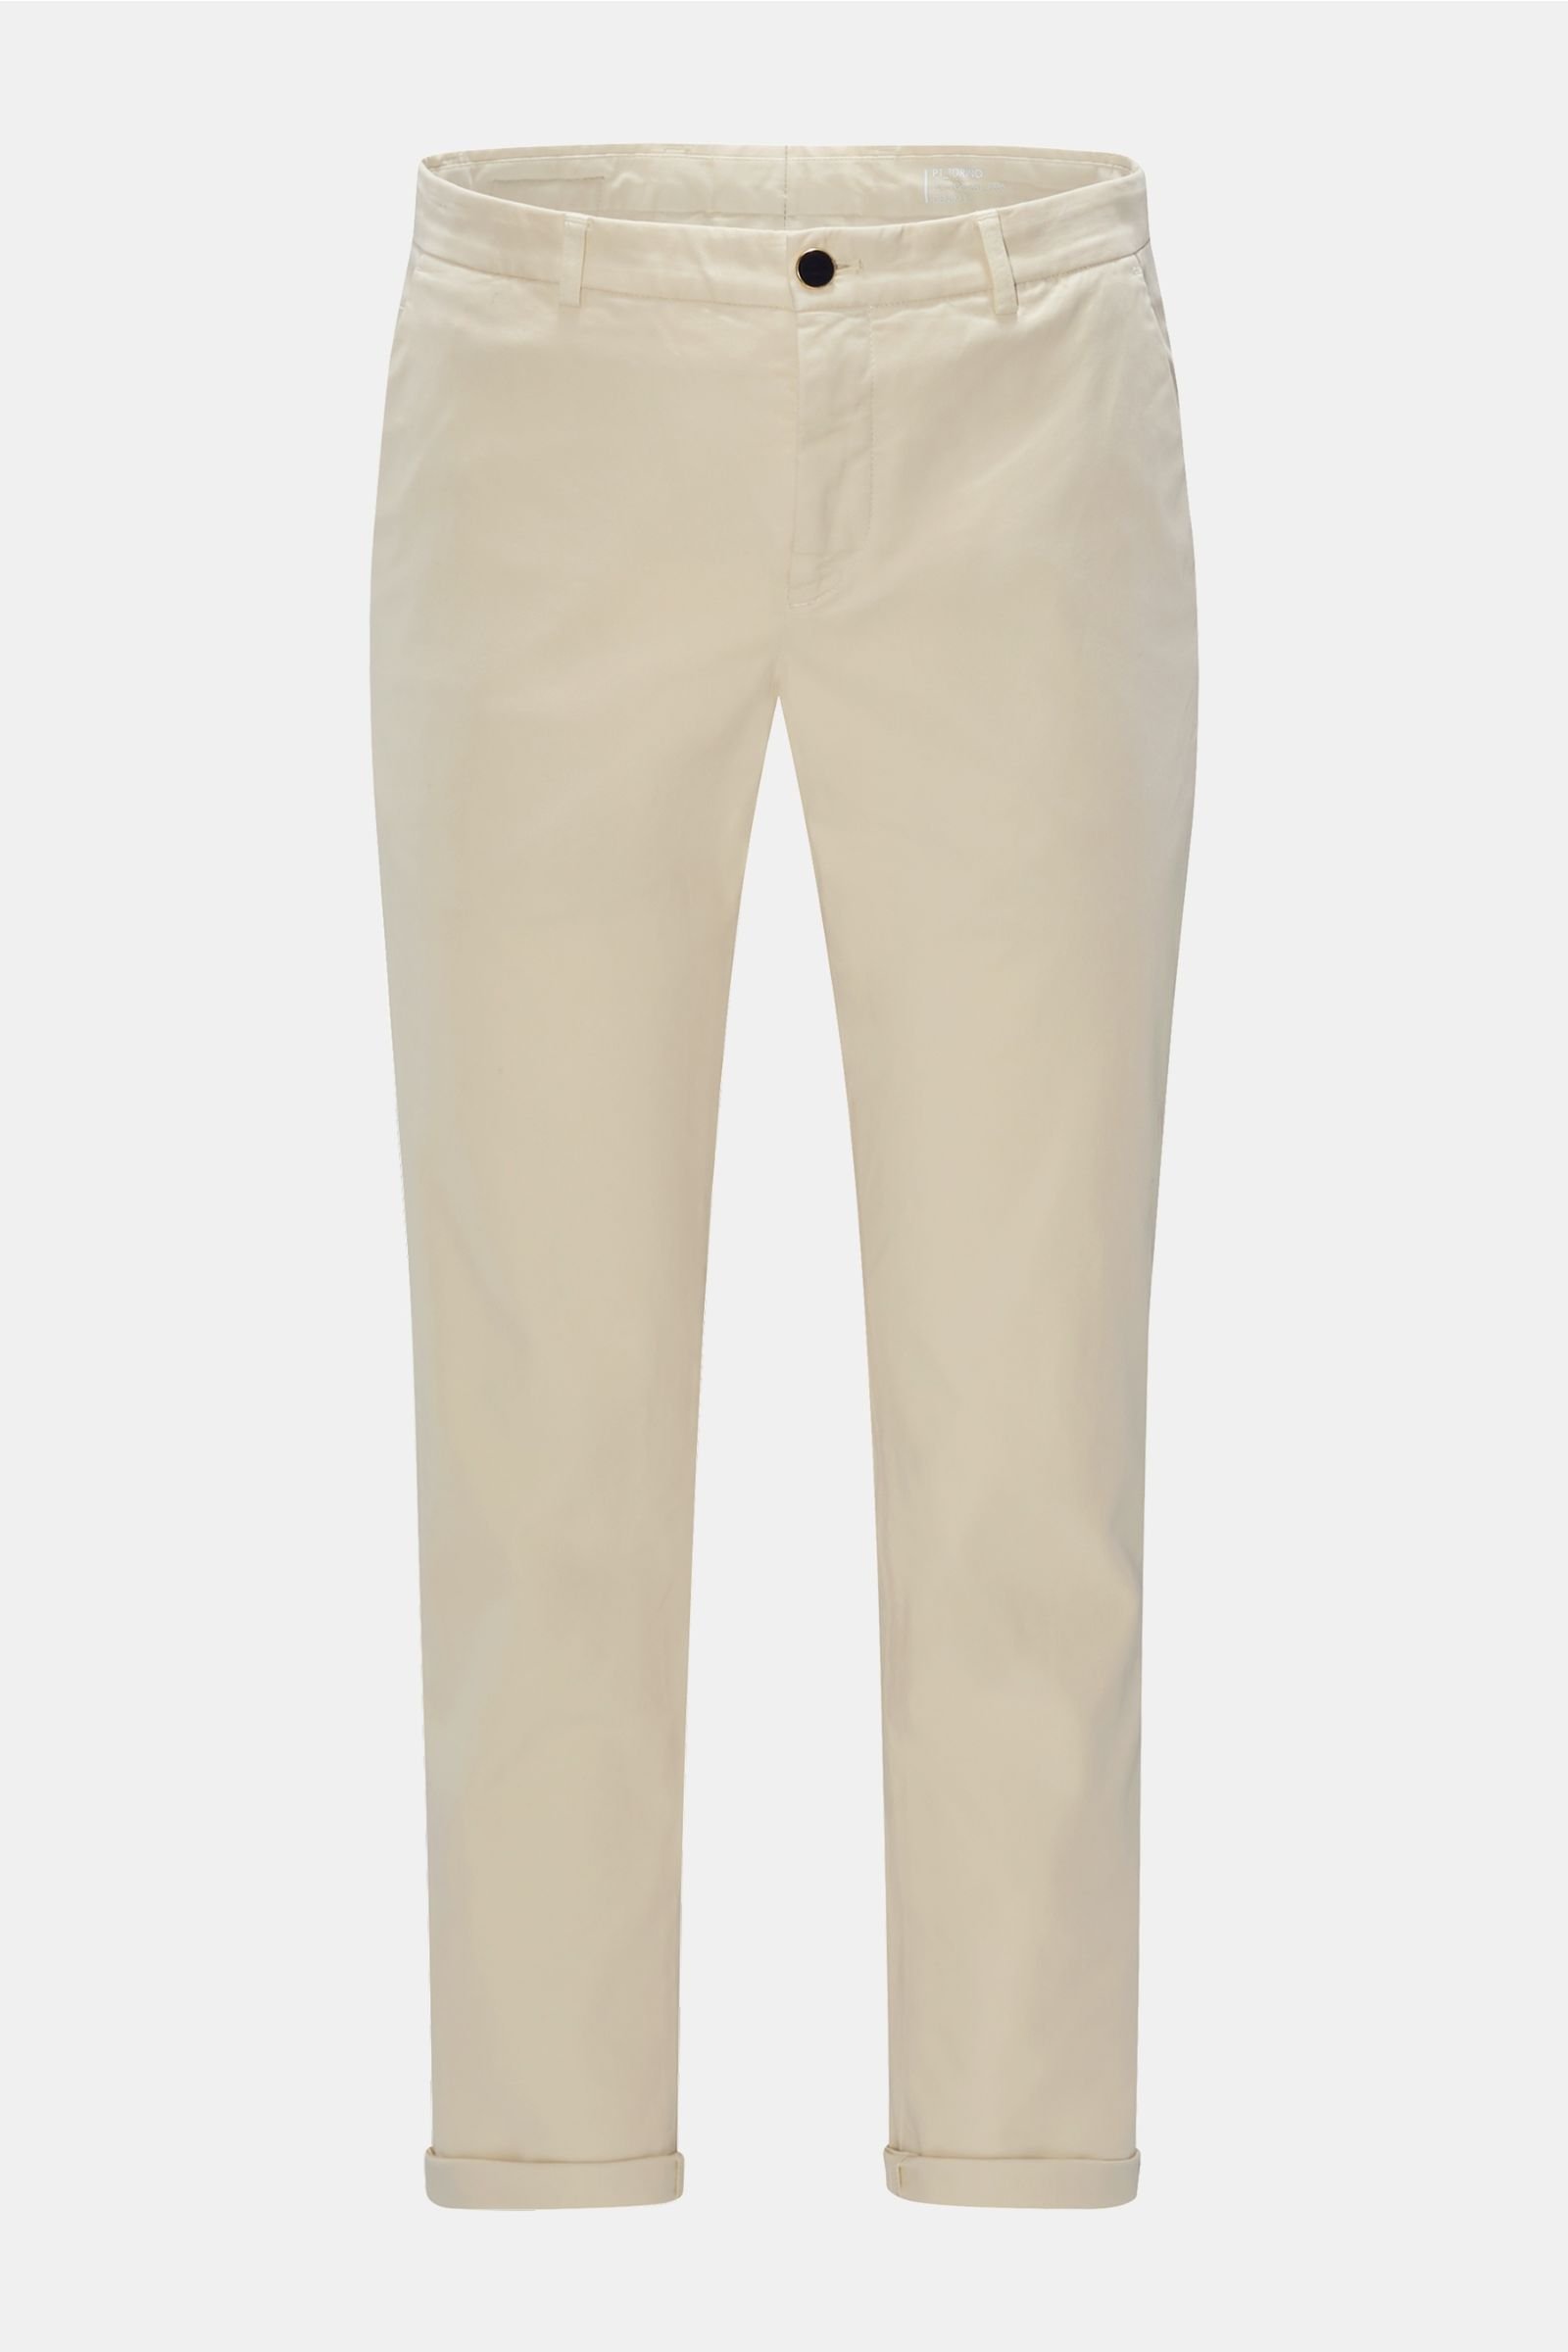 Cotton trousers 'Funky' cream